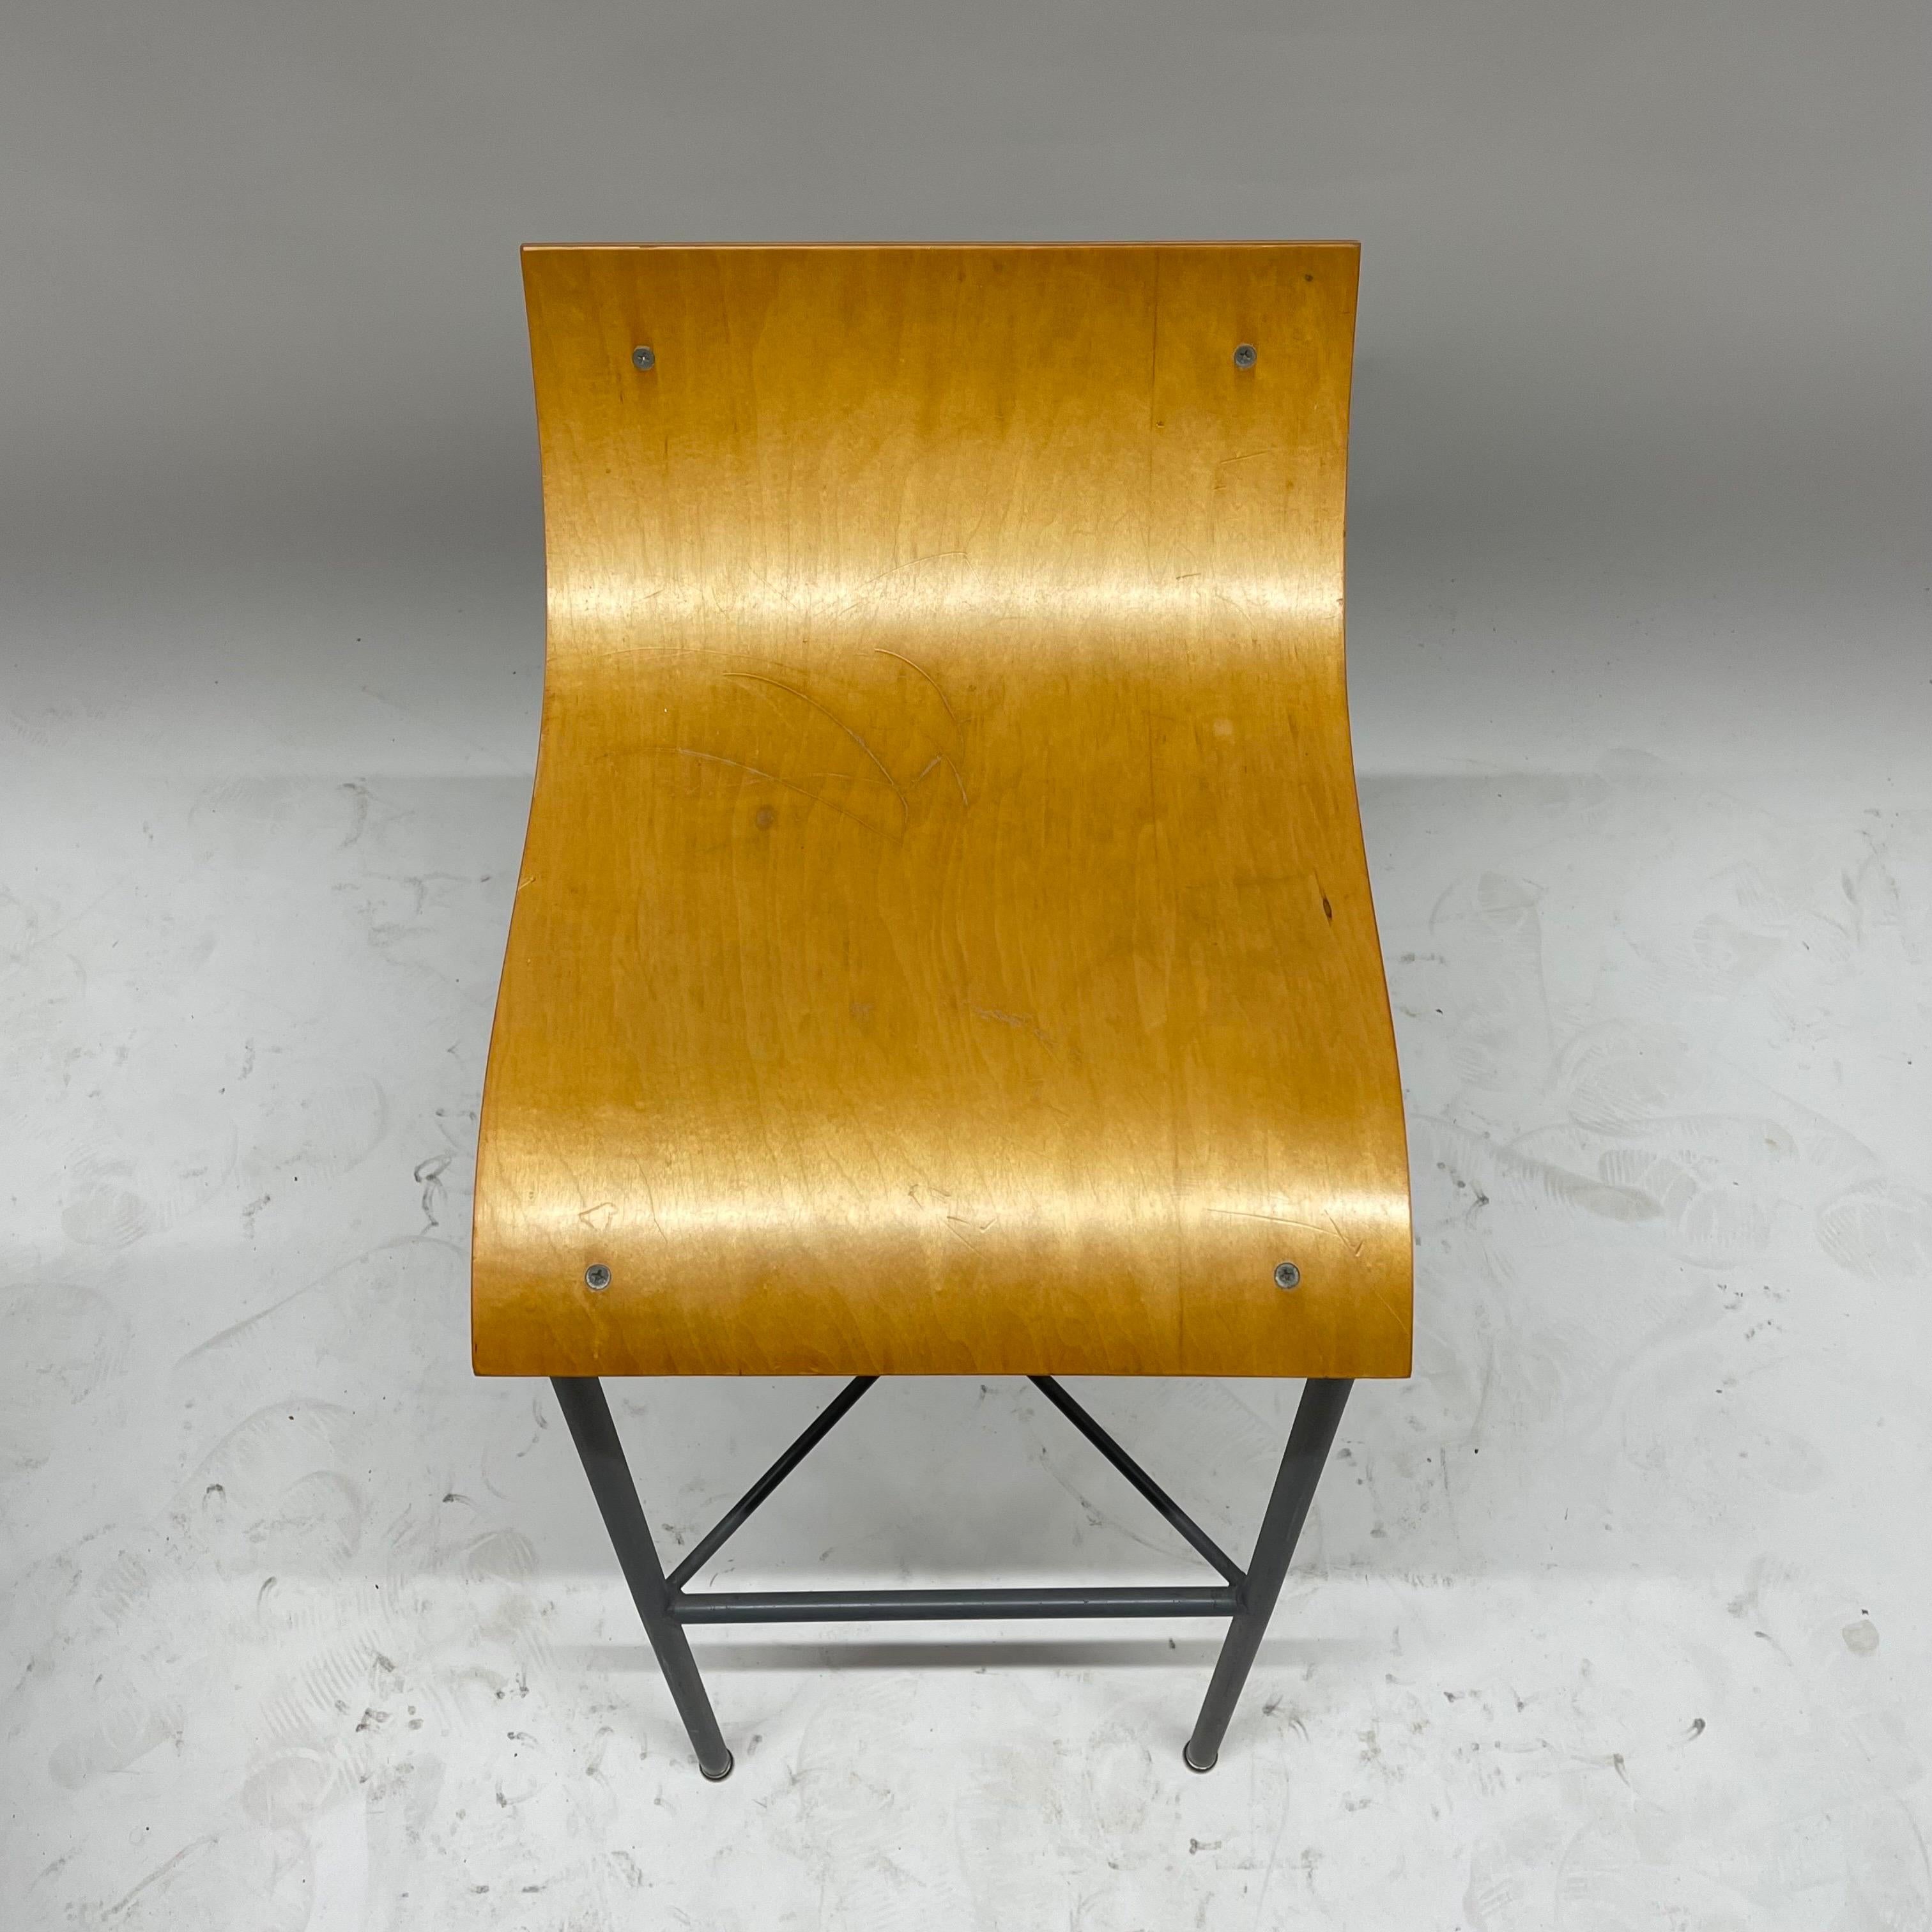 Pair of Post Modern Sculptural Steel and Bent Plywood Bar Stools, circa 1980s For Sale 2